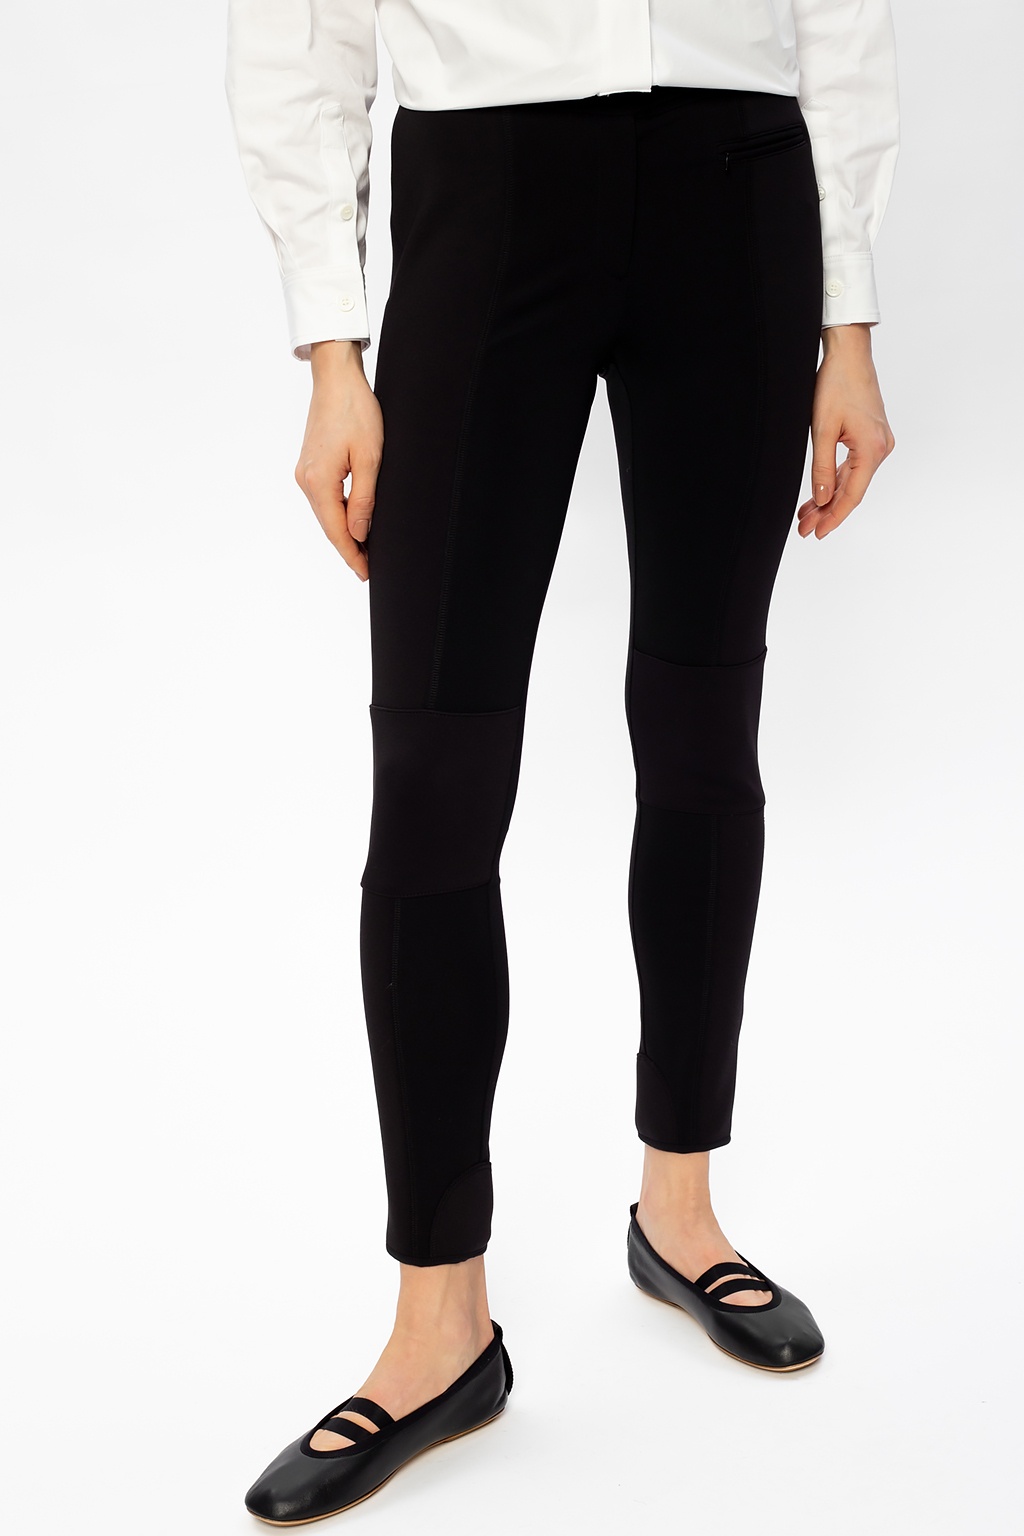 Burberry High-waisted trousers